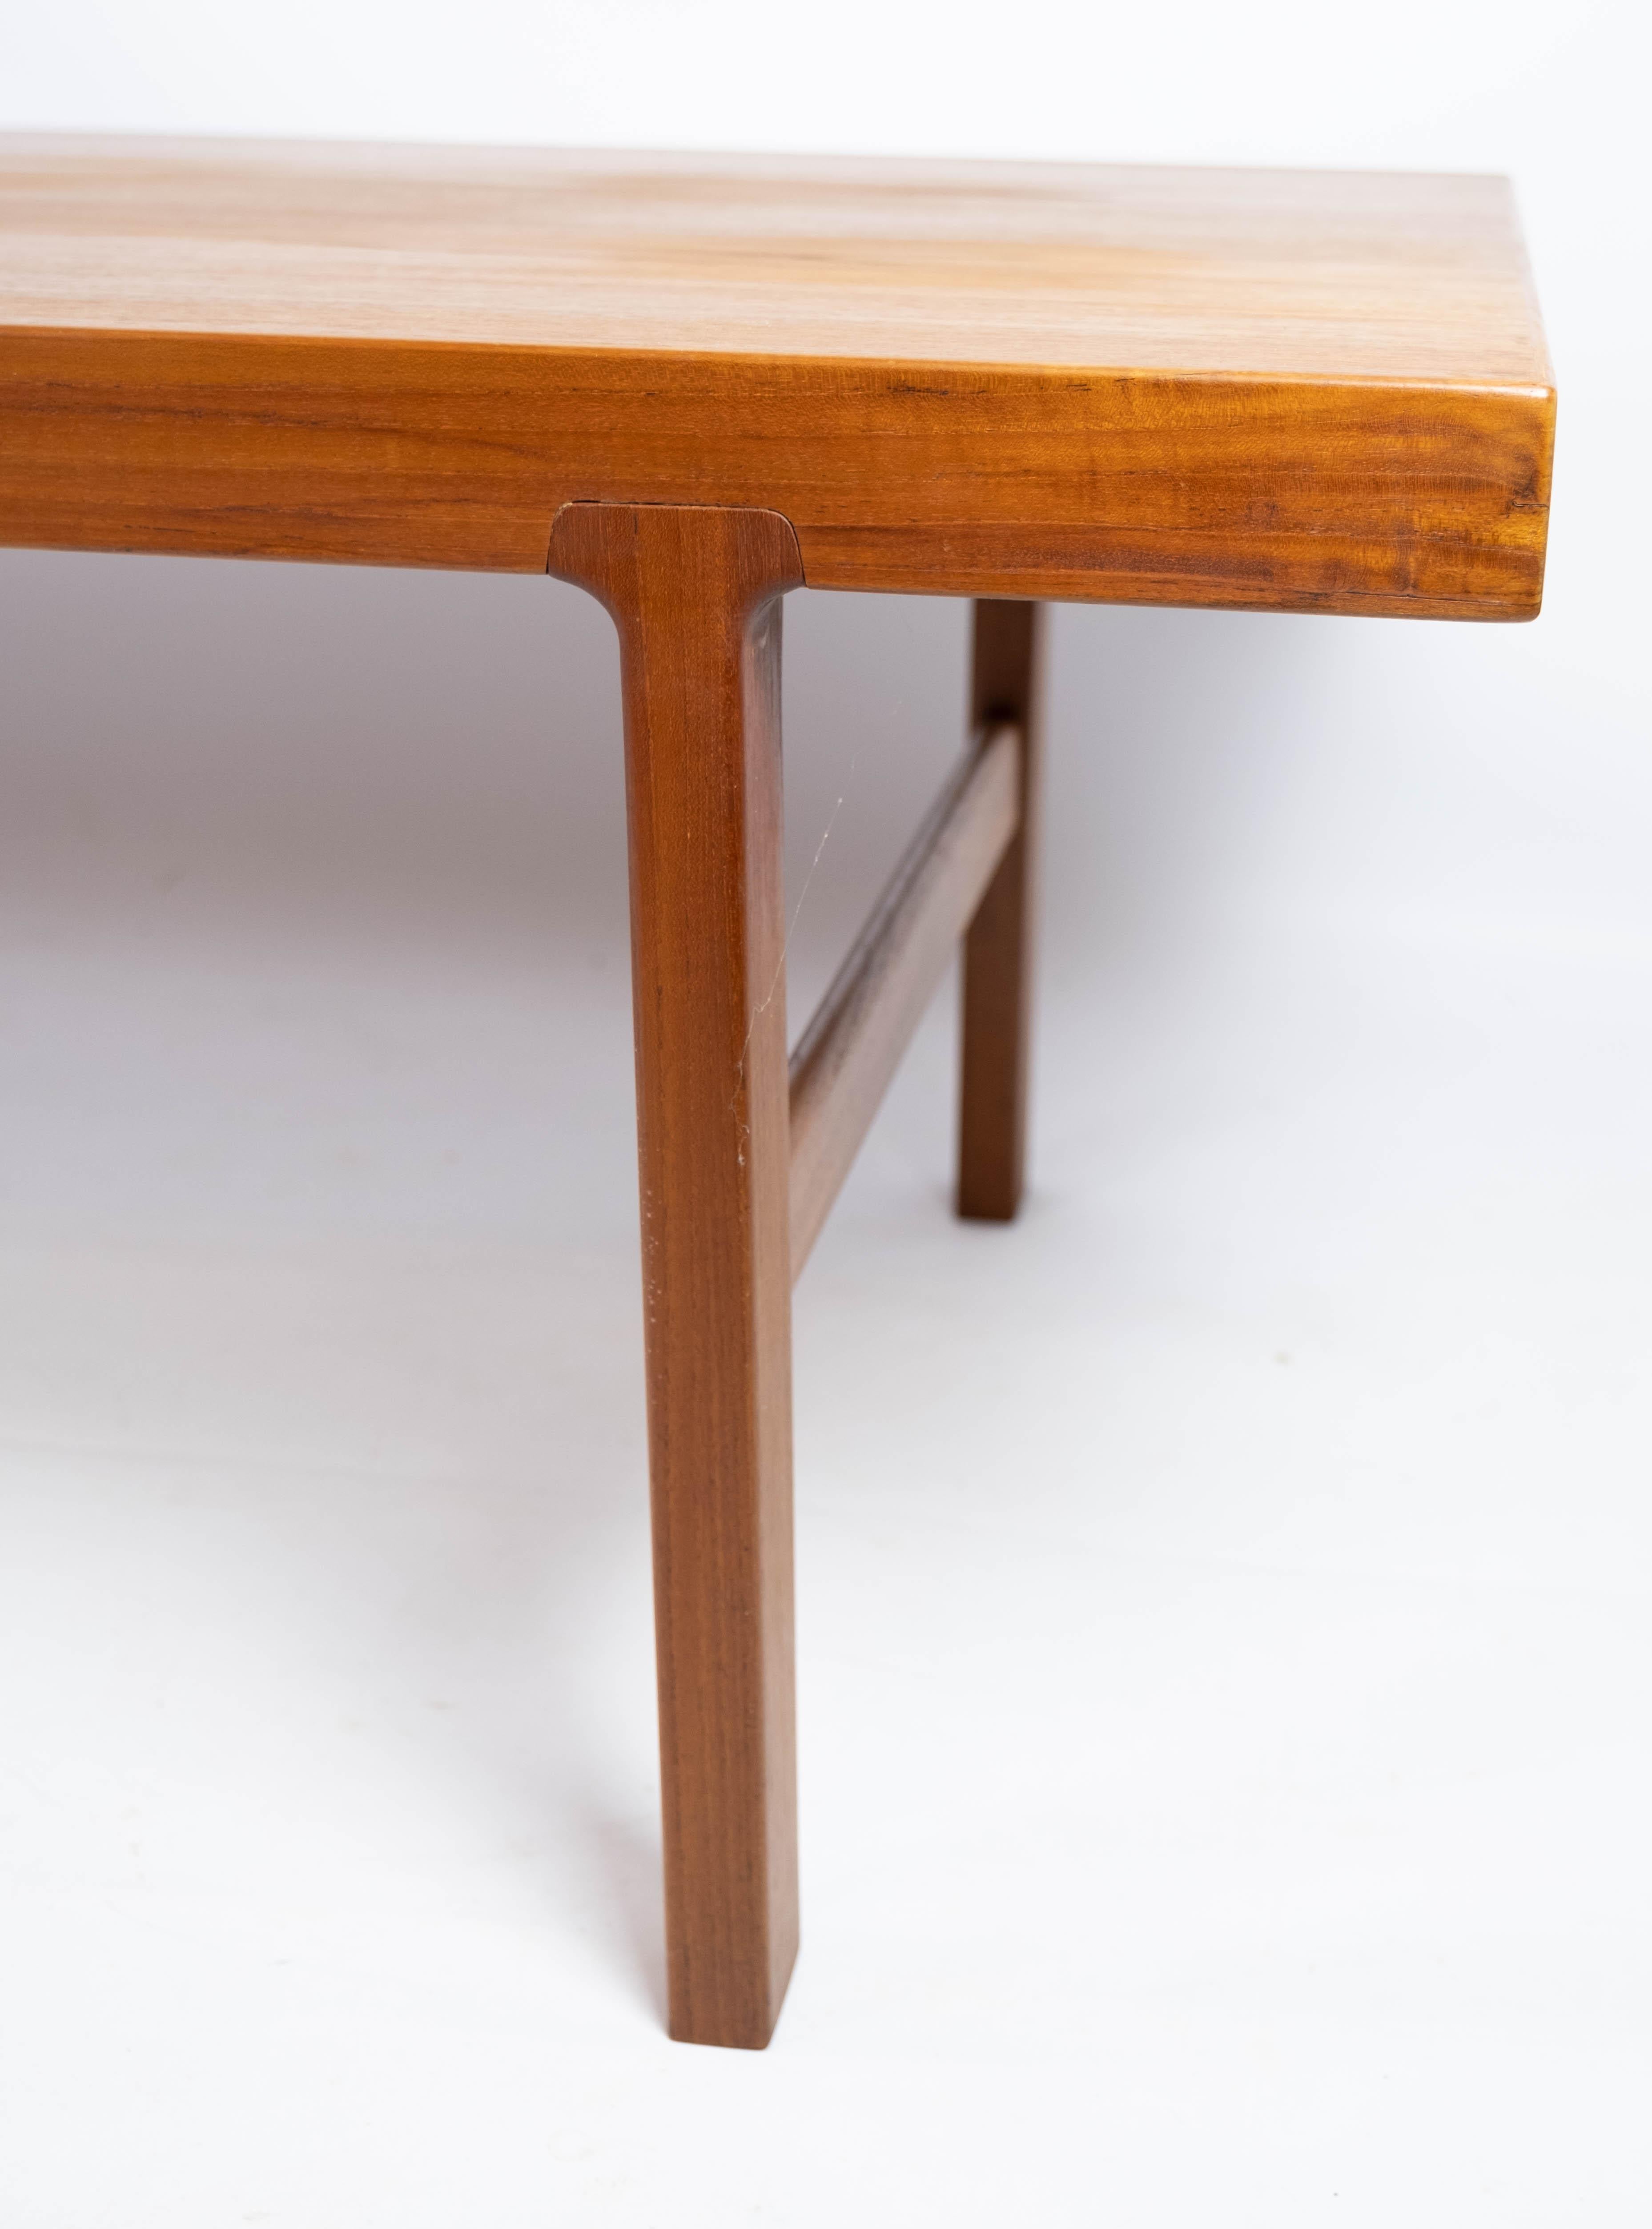 Mid-Century Modern Coffee Table Made In Teak With Extension Plate, Danish Design From 1960s For Sale